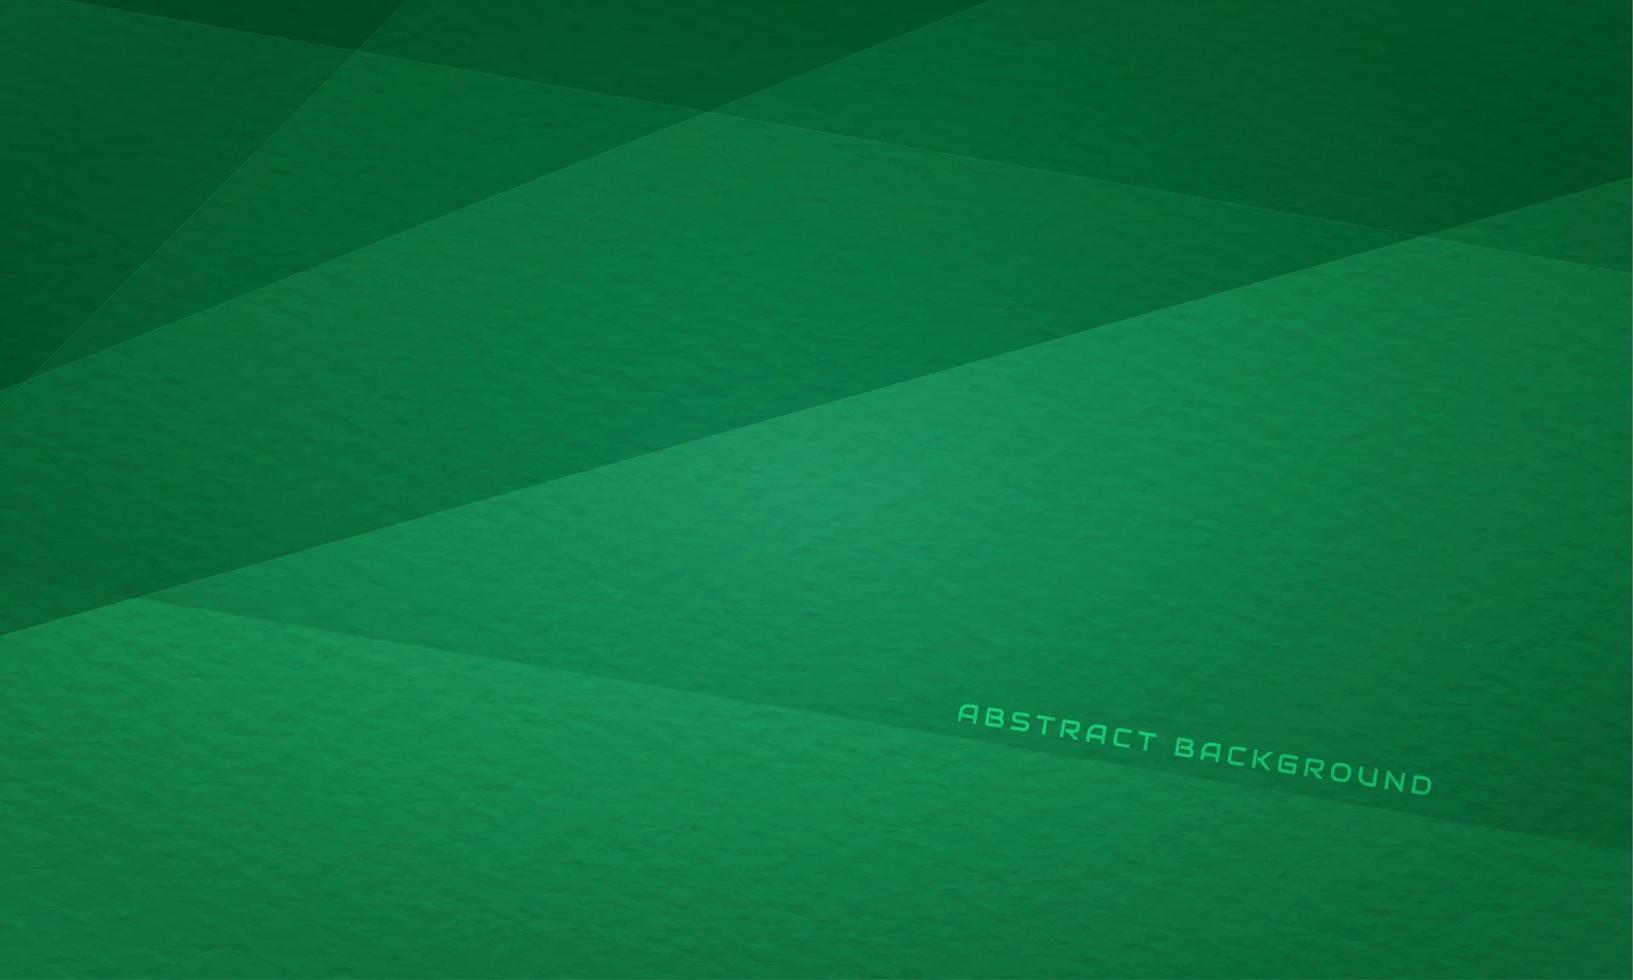 Abstract green background vector design, banner pattern, background template.